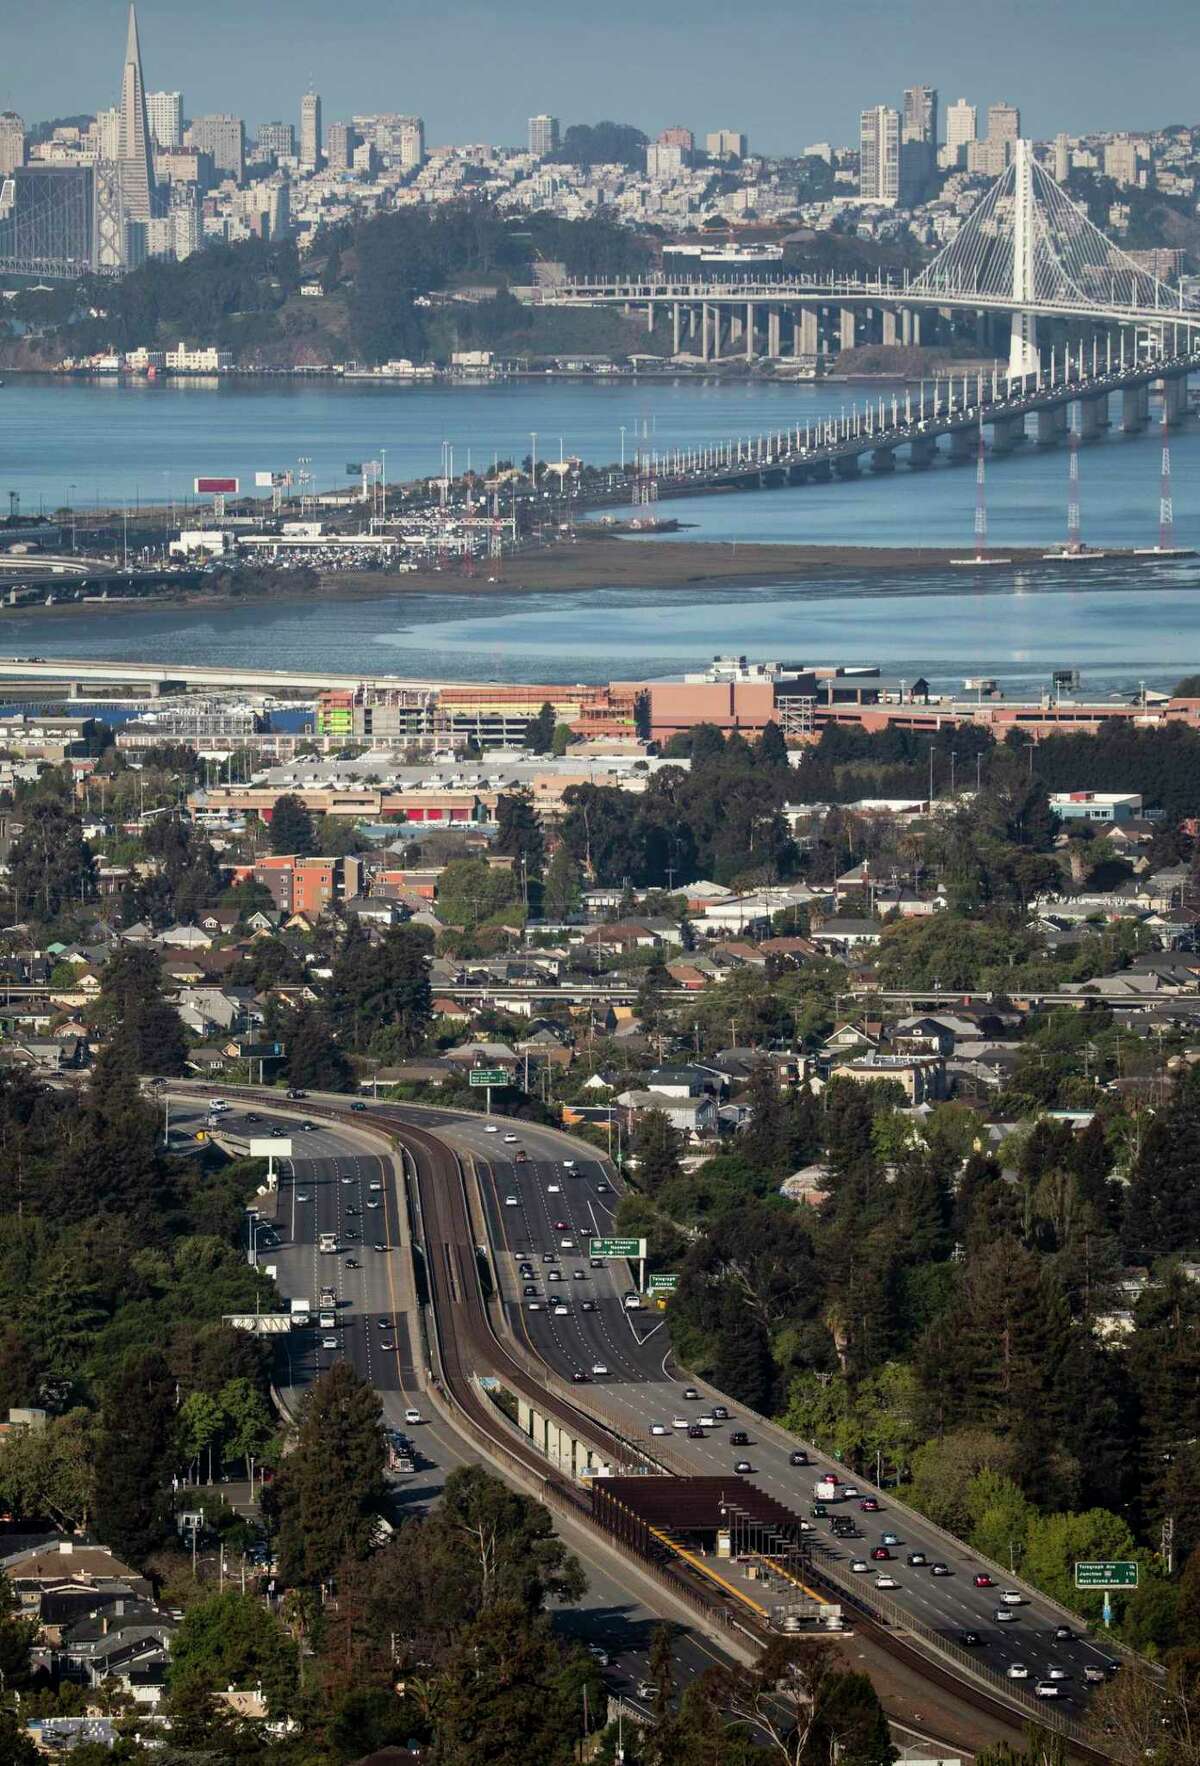 Cars move comfortably along Highway 24 in Oakland in April. Caltrans data for the Bay Area’s nine counties shows that while traffic volume has rebounded to near pre-pandemic levels, actual congestion on freeways still remains lower than what it was before the pandemic.